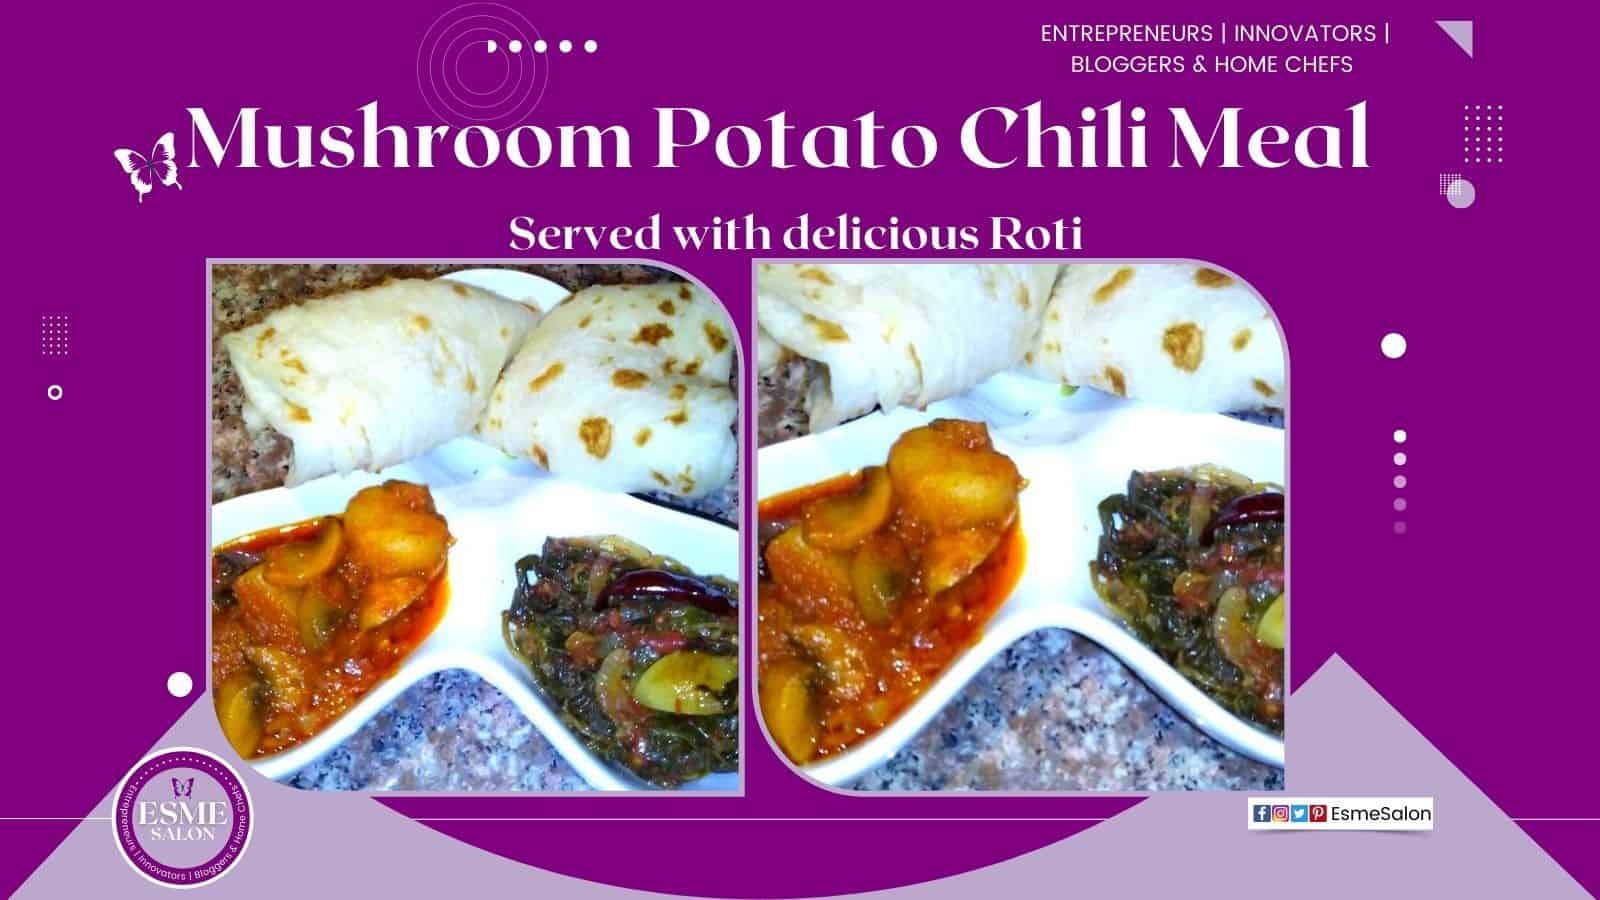 A delicious Mushroom Potato Chili Meal served with Roti and Braised Red Herbs